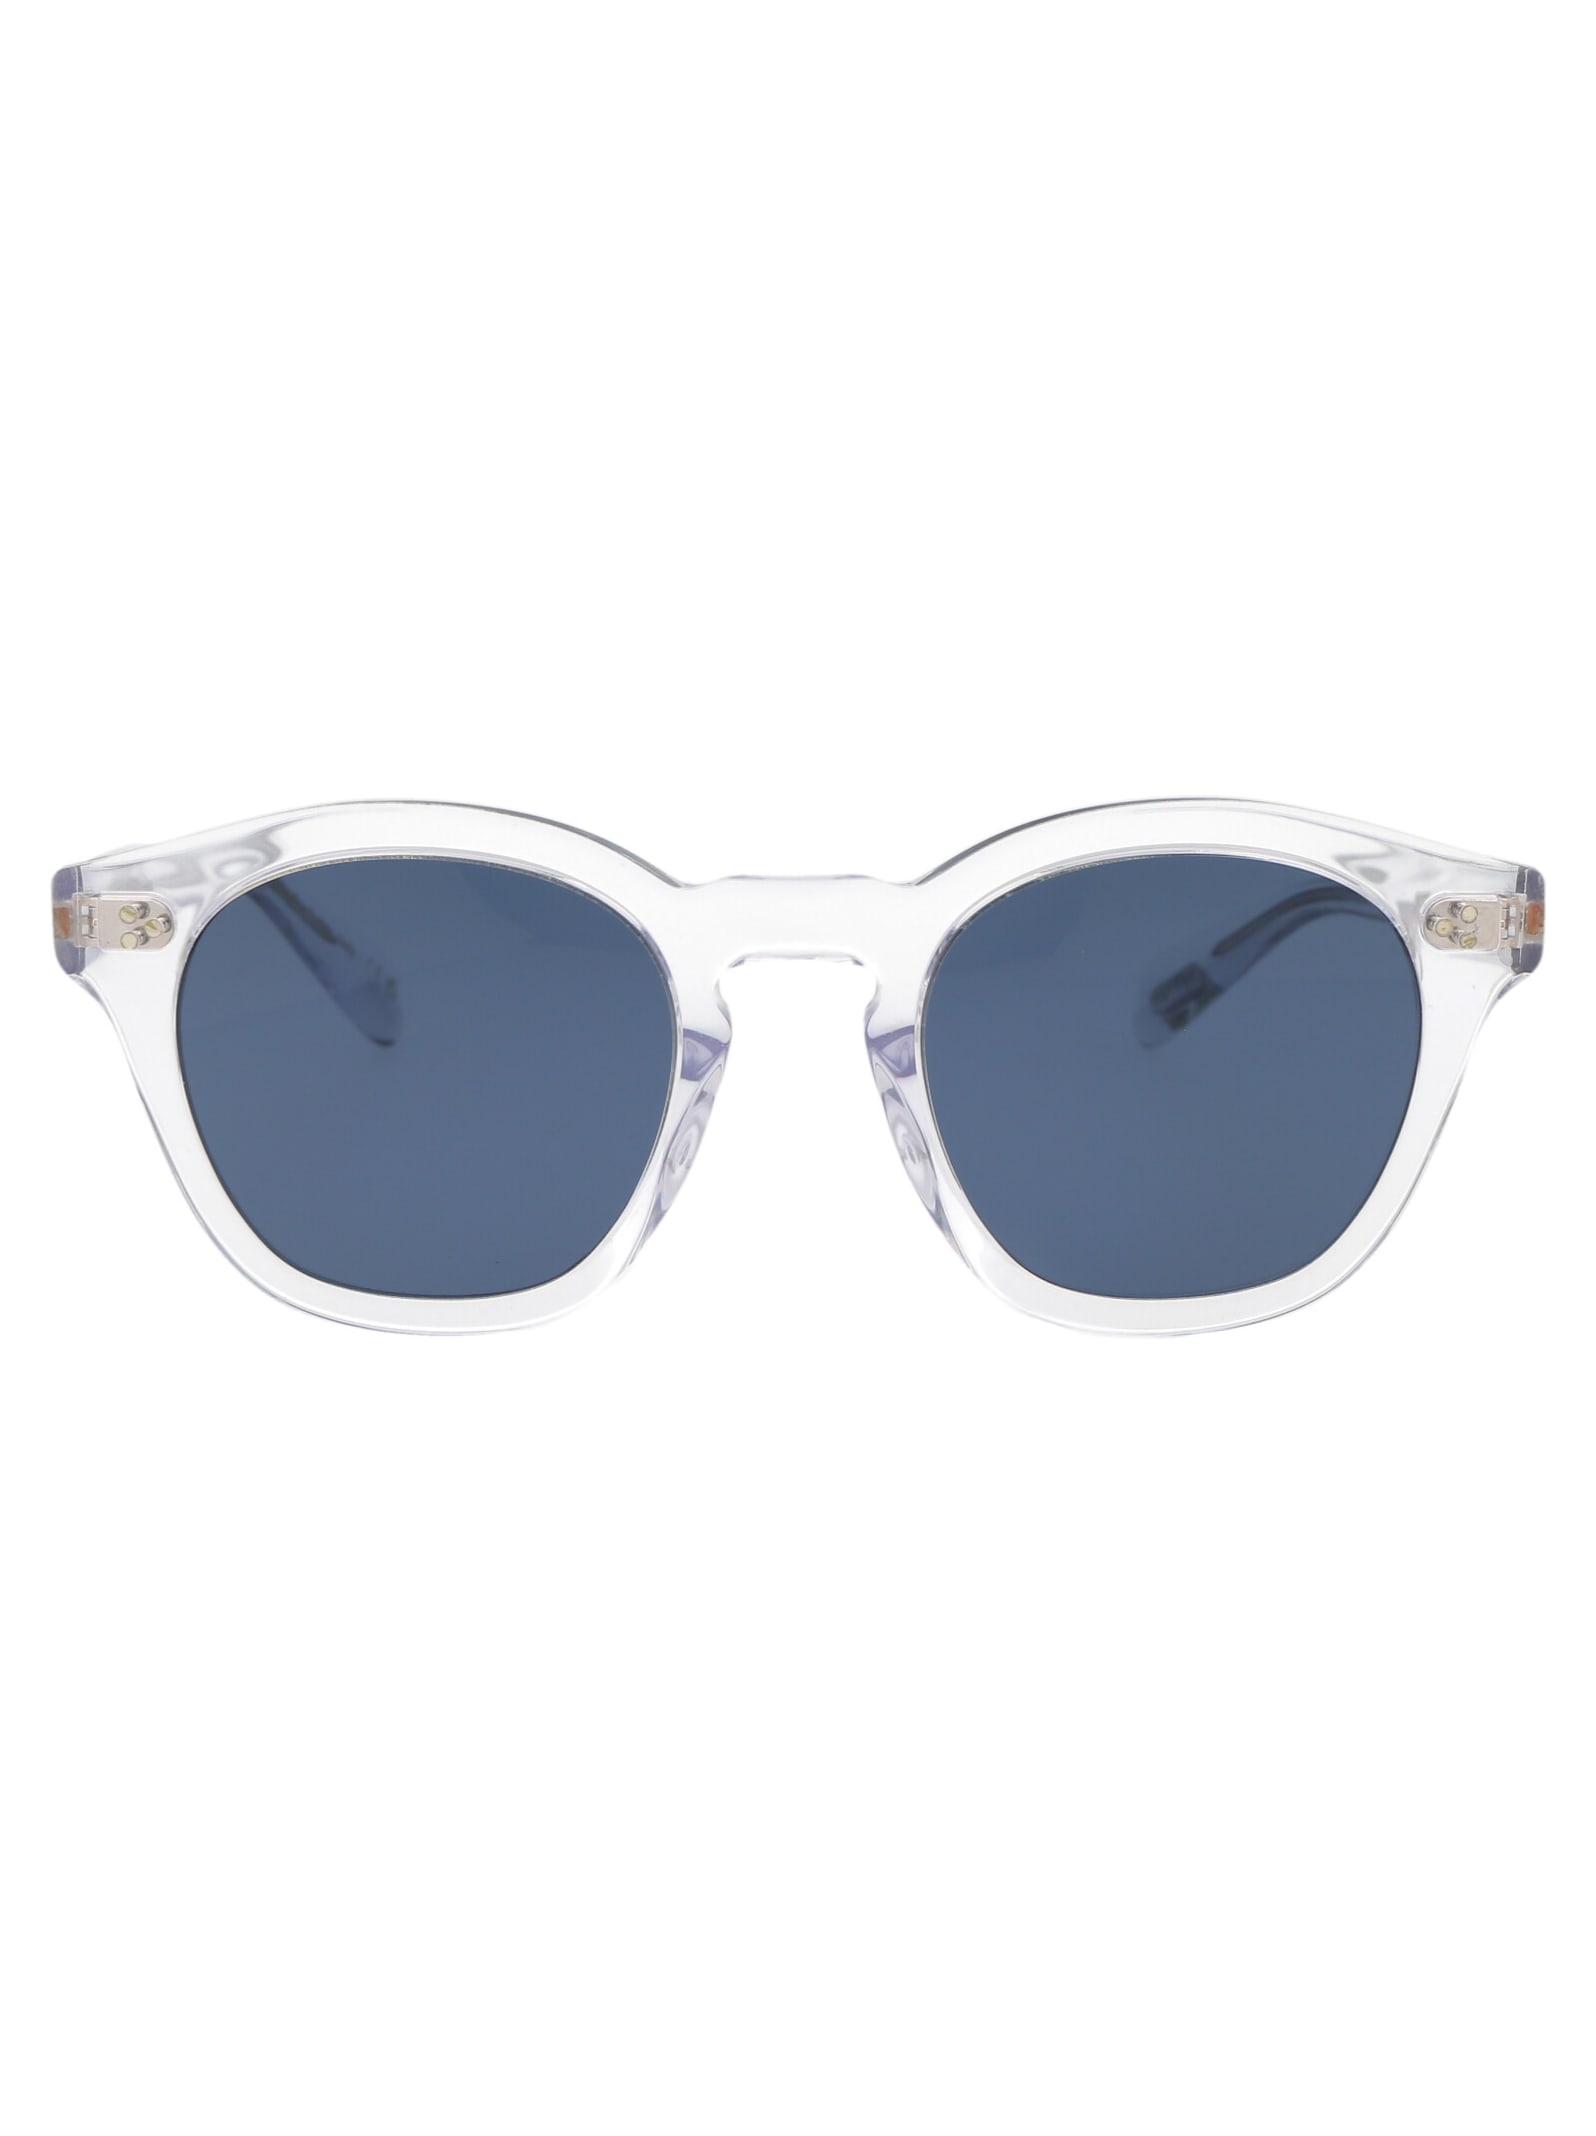 Oliver Peoples Boudreau L.a Sunglasses In Blue